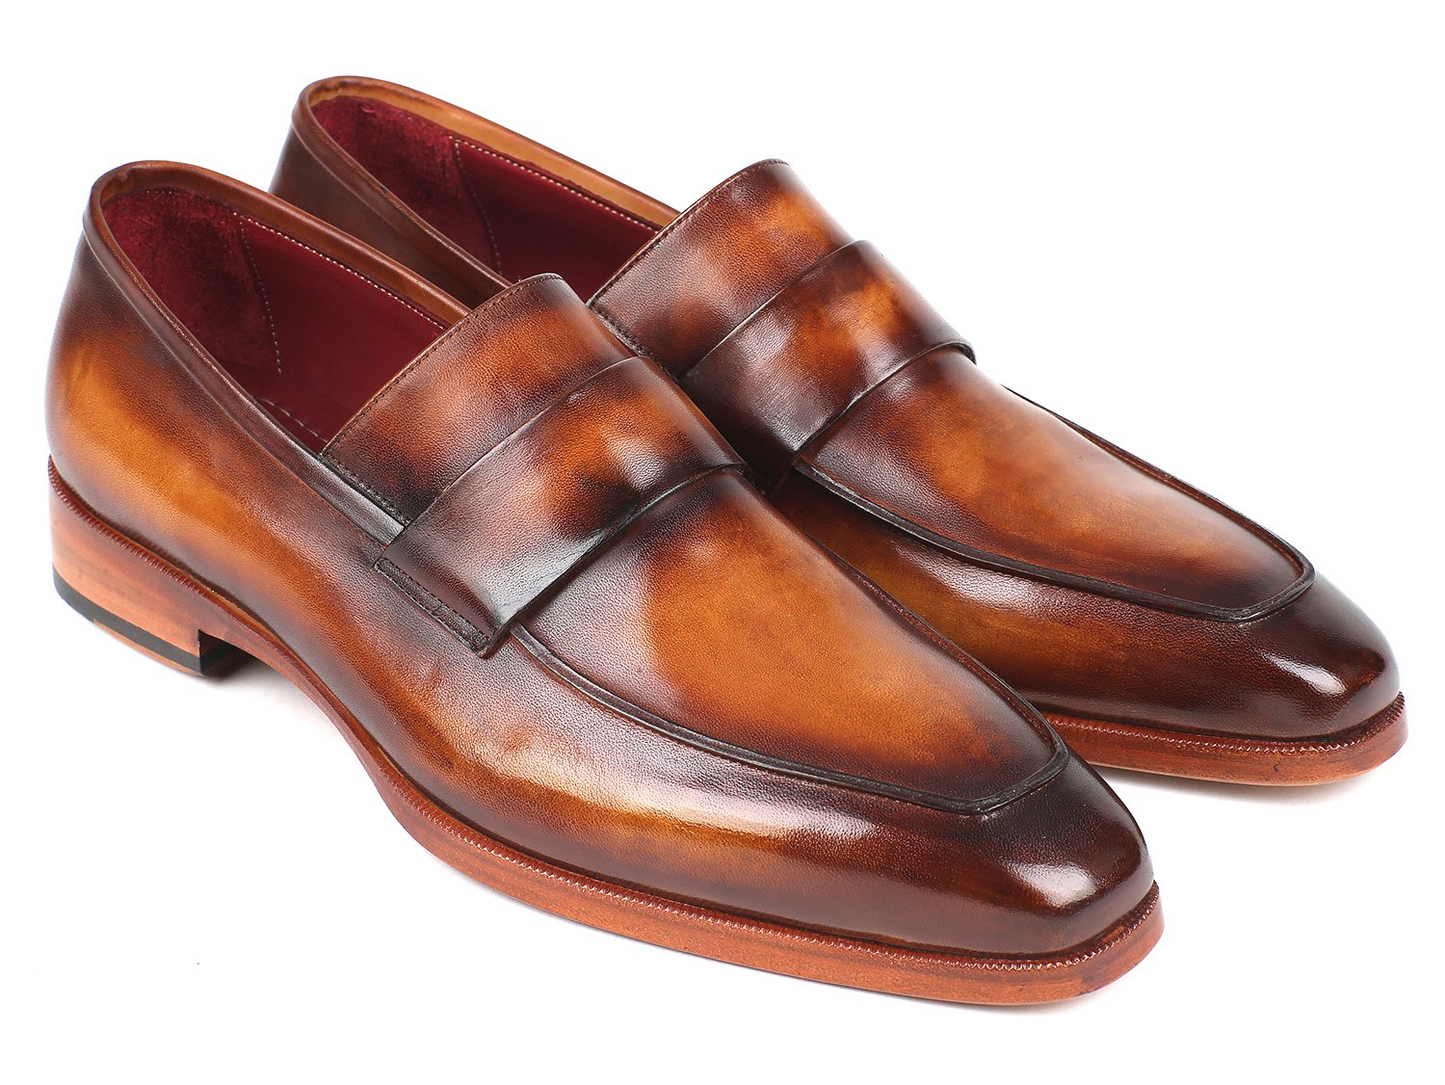 Burnished Loafers Brown, Handmade to order.